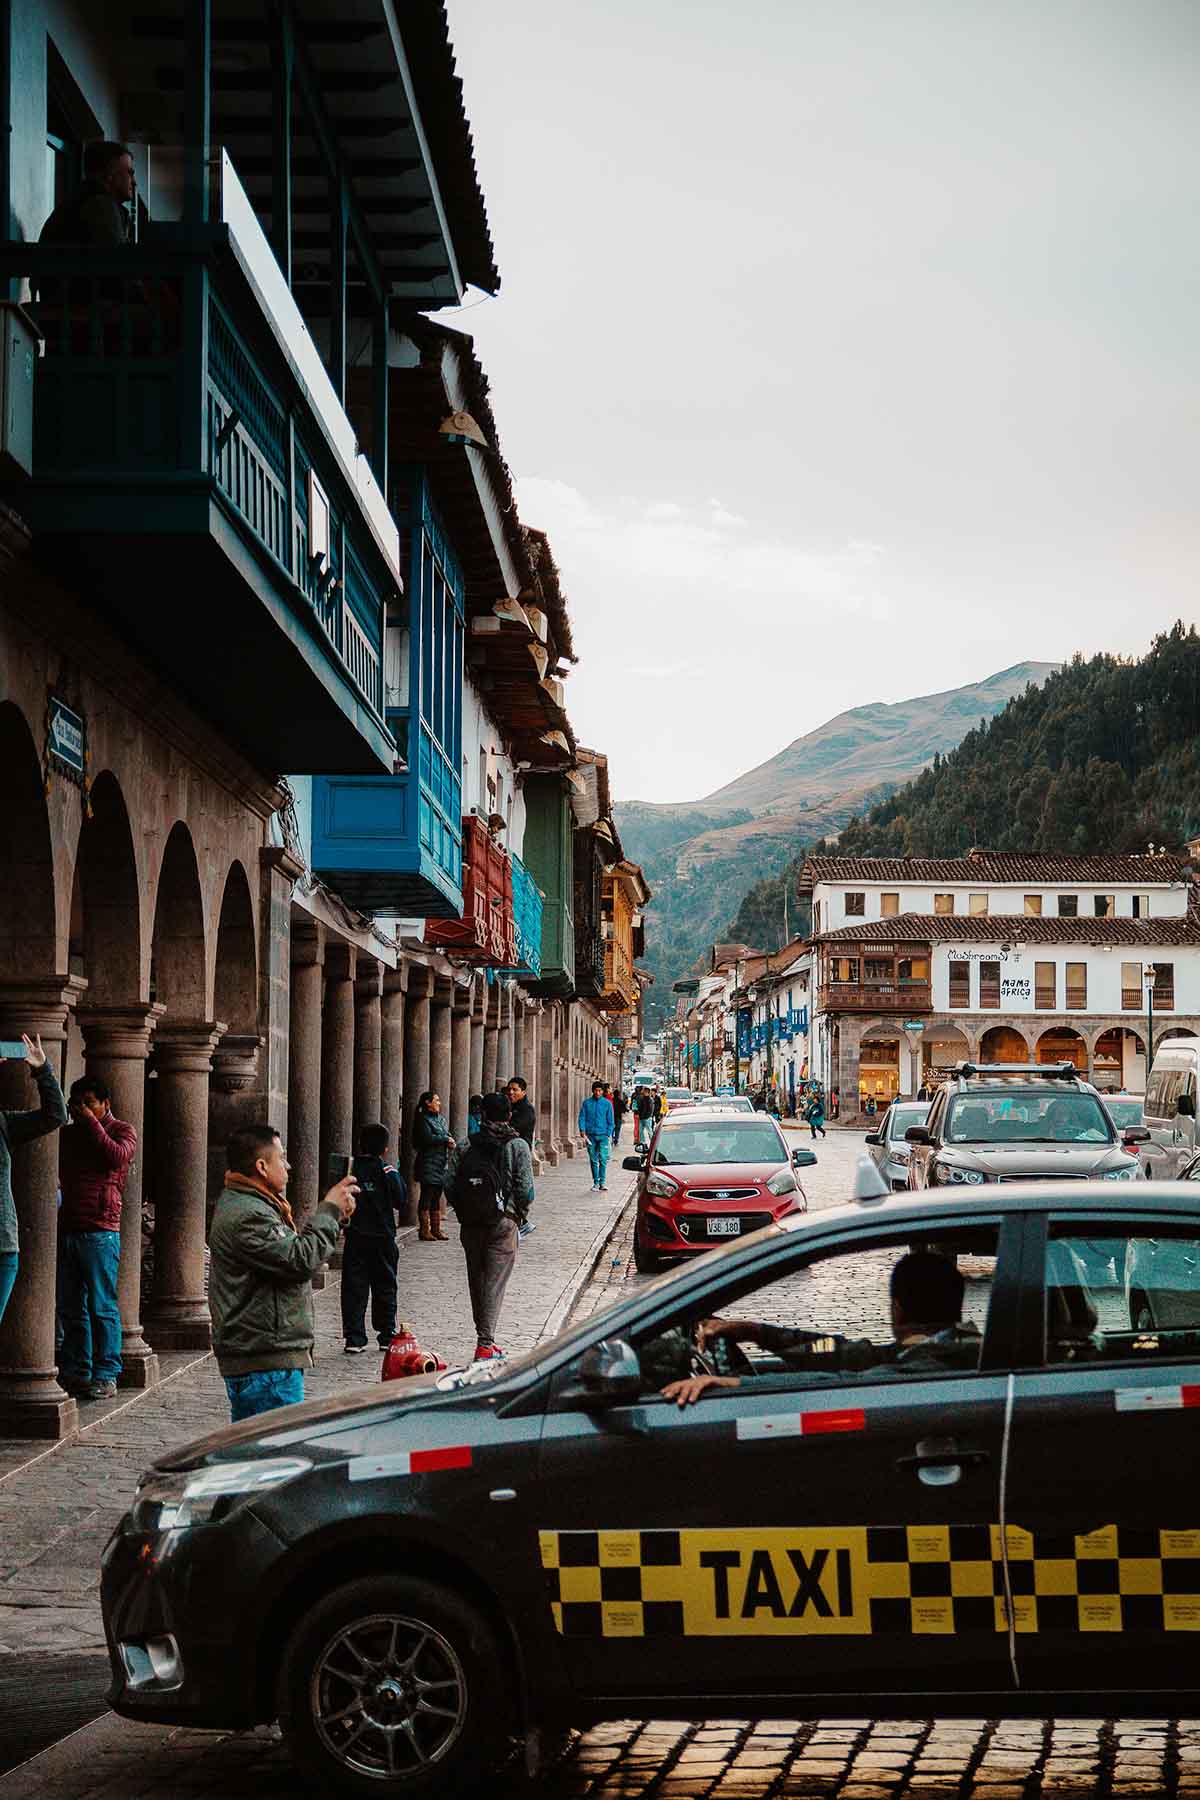 A taxi is parked in front of a row of arches on Cusco's Plaza de Armas as people walk by.